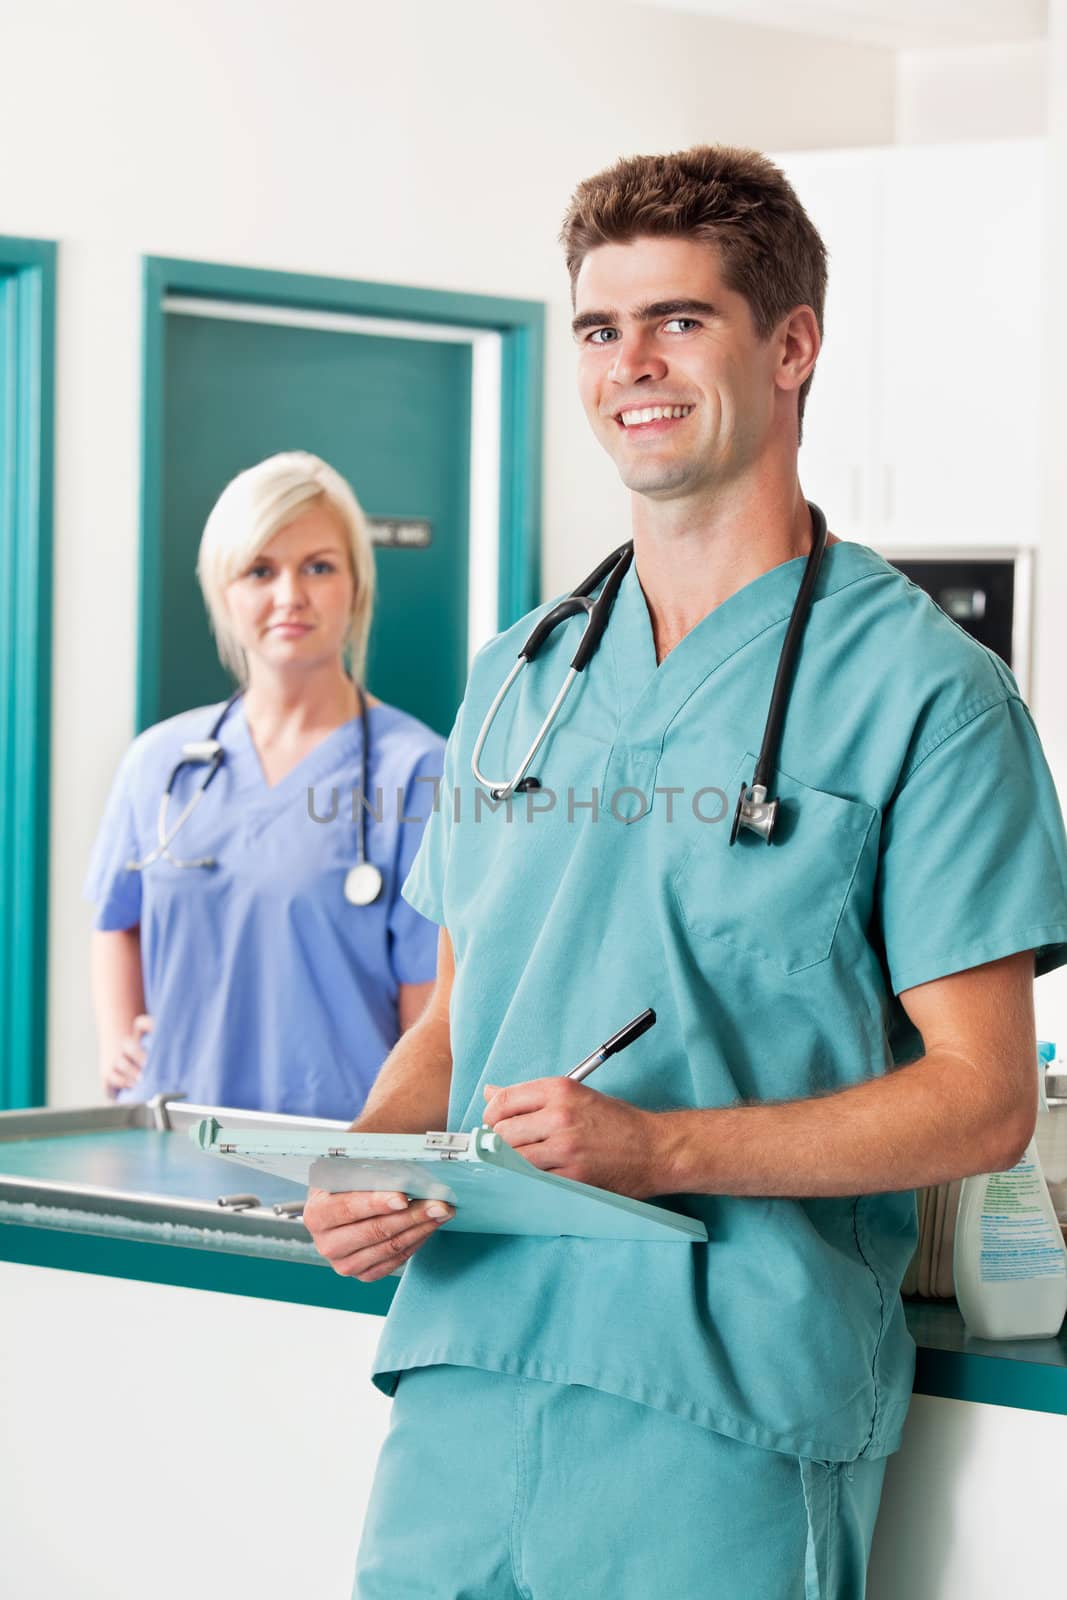 Male veterinarian with clipboard while assistant in the backgrou by leaf